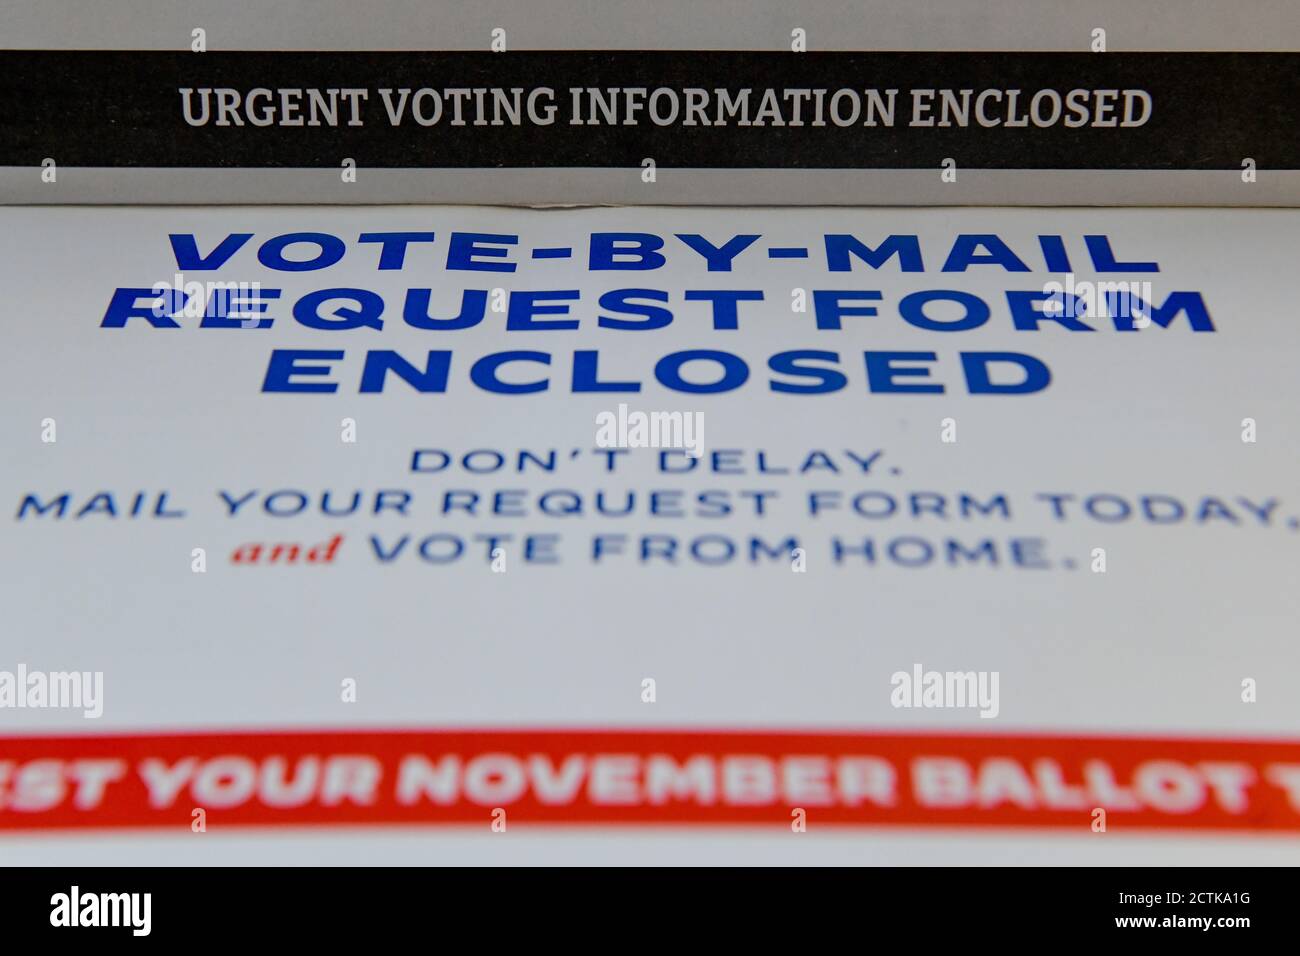 Pennsylvania, USA. 23rd Sep 2020. Vote By Mail | voting by mail - mail-in voting request forms and presidential election voting campaign materials - Joe Biden and Kamala Harris campaign voting information arrives via the United States Postal Office Credit: Don Mennig/Alamy Live News Stock Photo